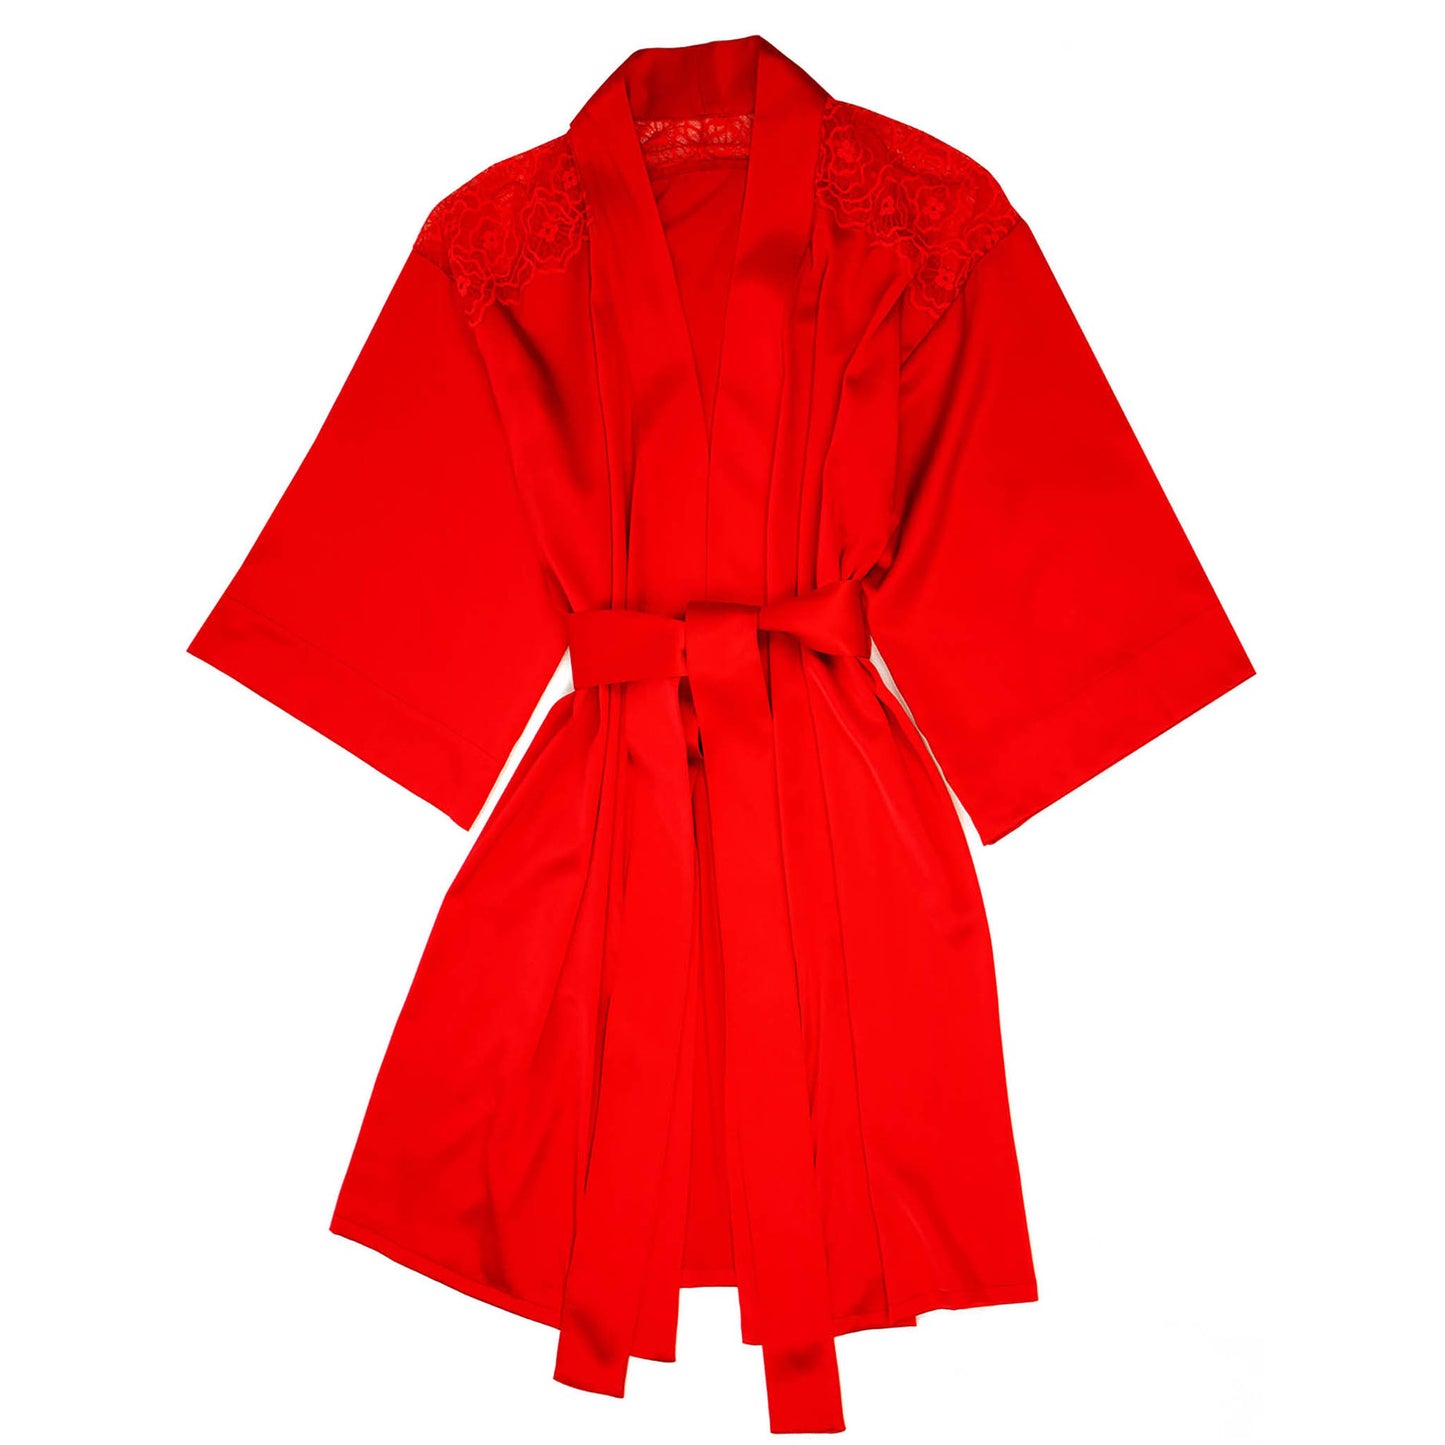 The Good Girl Gone Bad robe is made from Mulberry silk and has charming lace inserts.